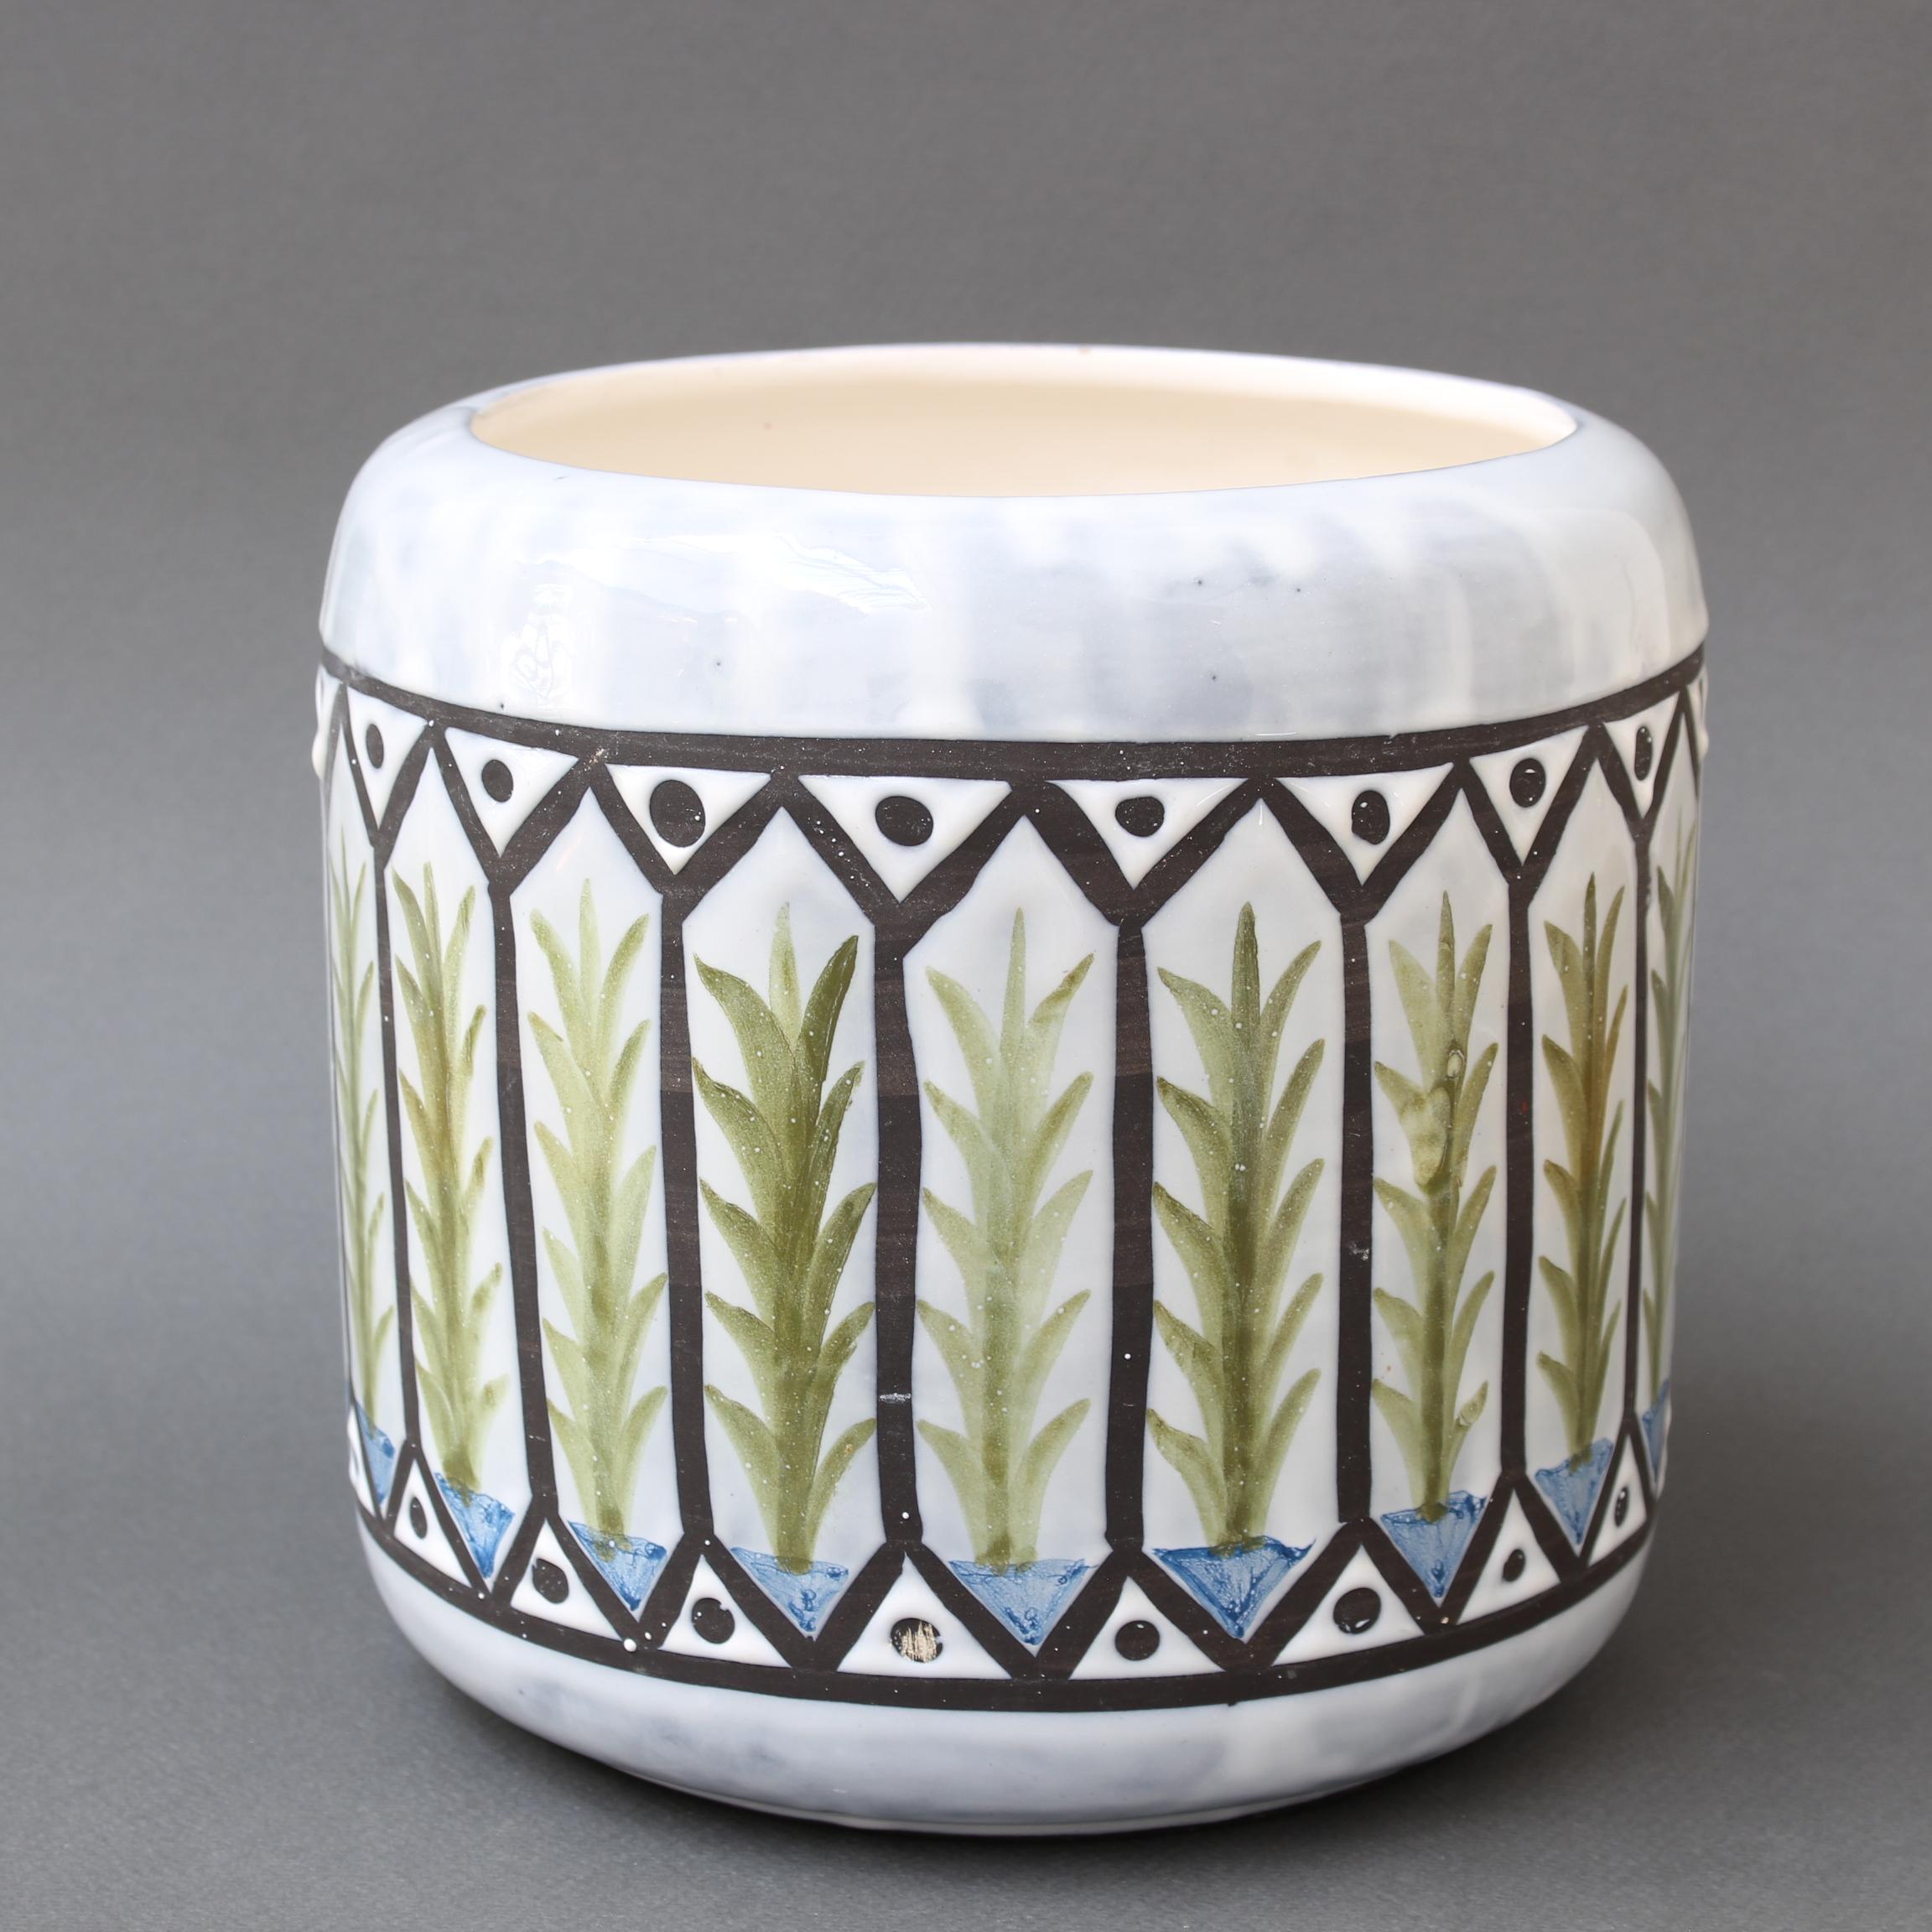 Vintage French Ceramic Cachepot by Roger Capron, 'circa 1970s' For Sale 1